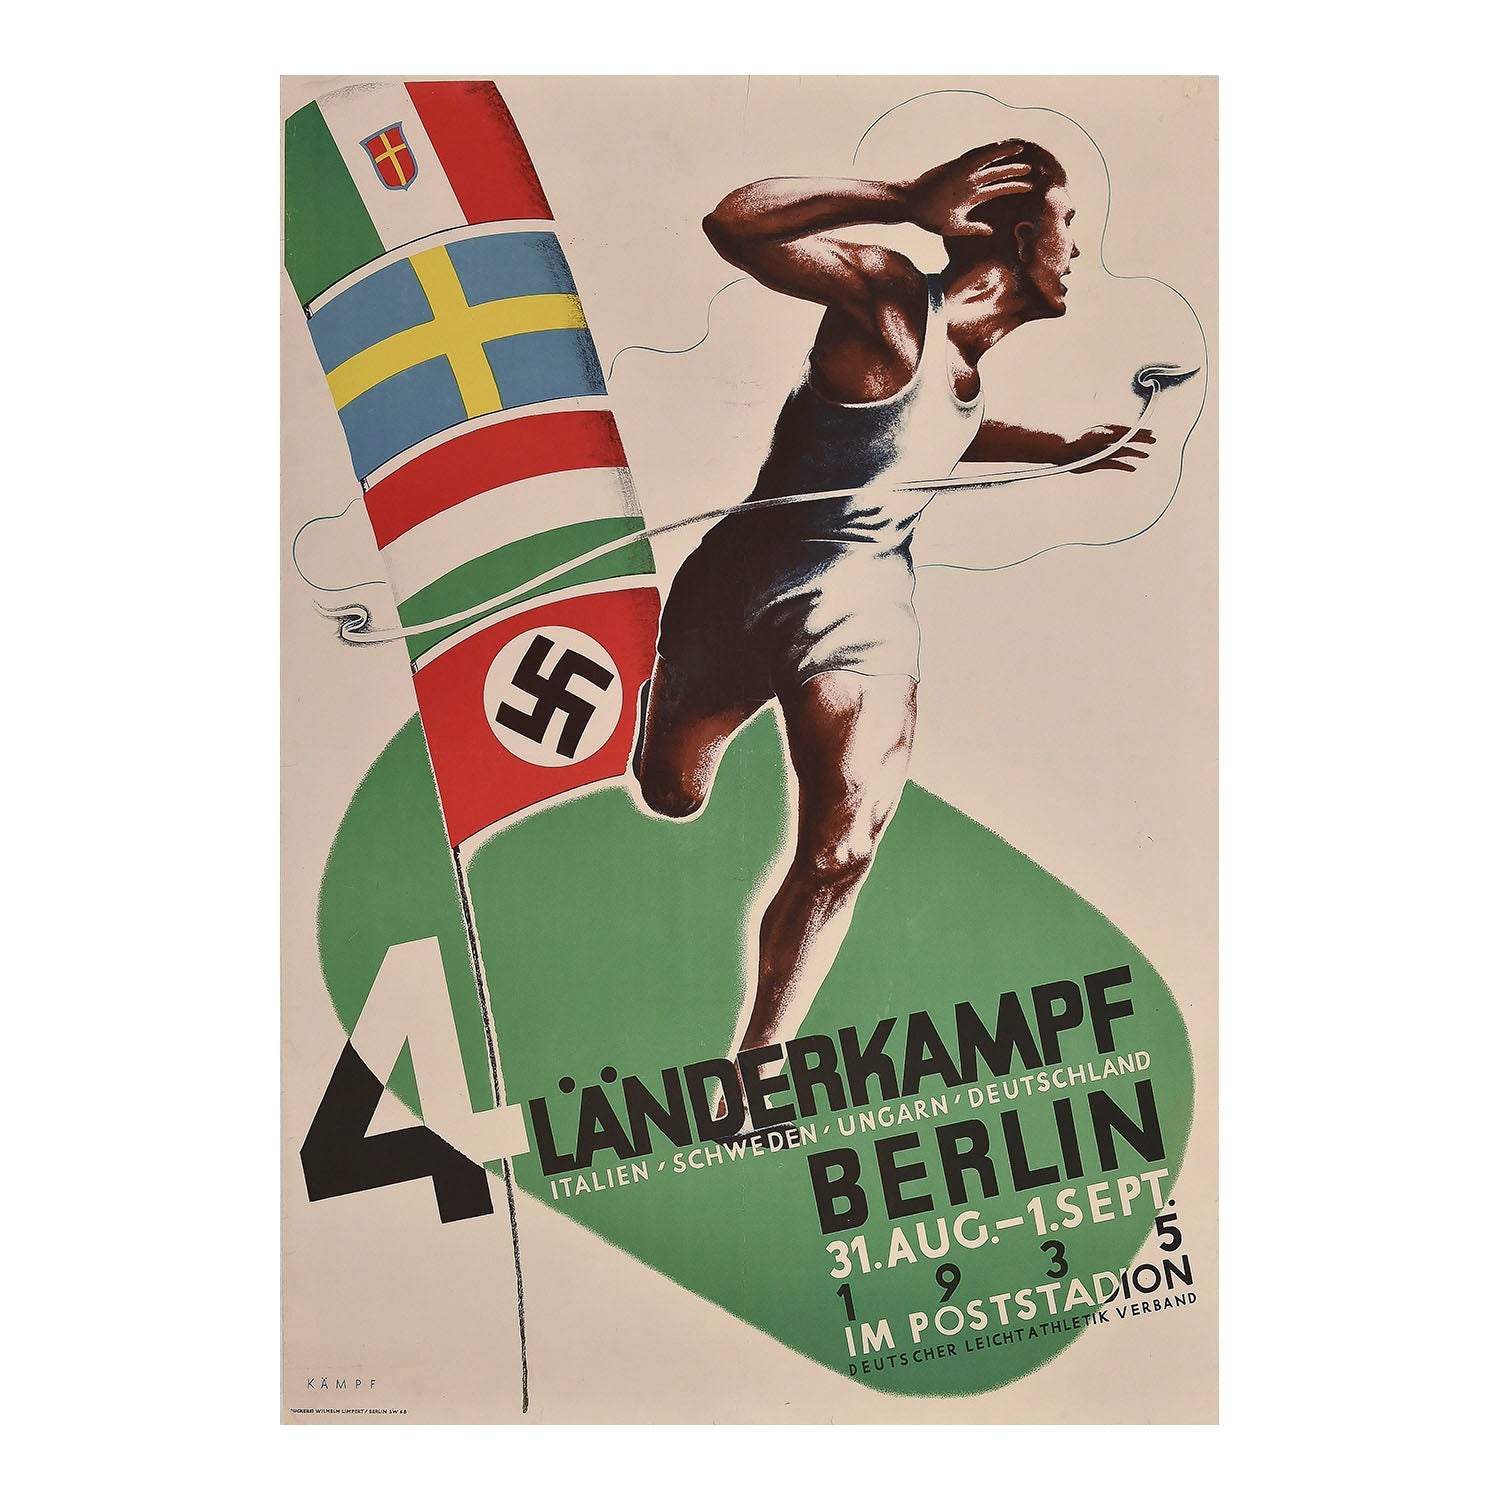 original poster for the 1935 Berlin Länderkampf (international sporting competition) organised by the German Athletics Association. The competition was held at the Poststadion stadium and included competitors from Italy, Sweden, Hungary and German. The poster design, by Arthur Kampf, features a runner crossing the finishing line with the flags of the competing nations in the background